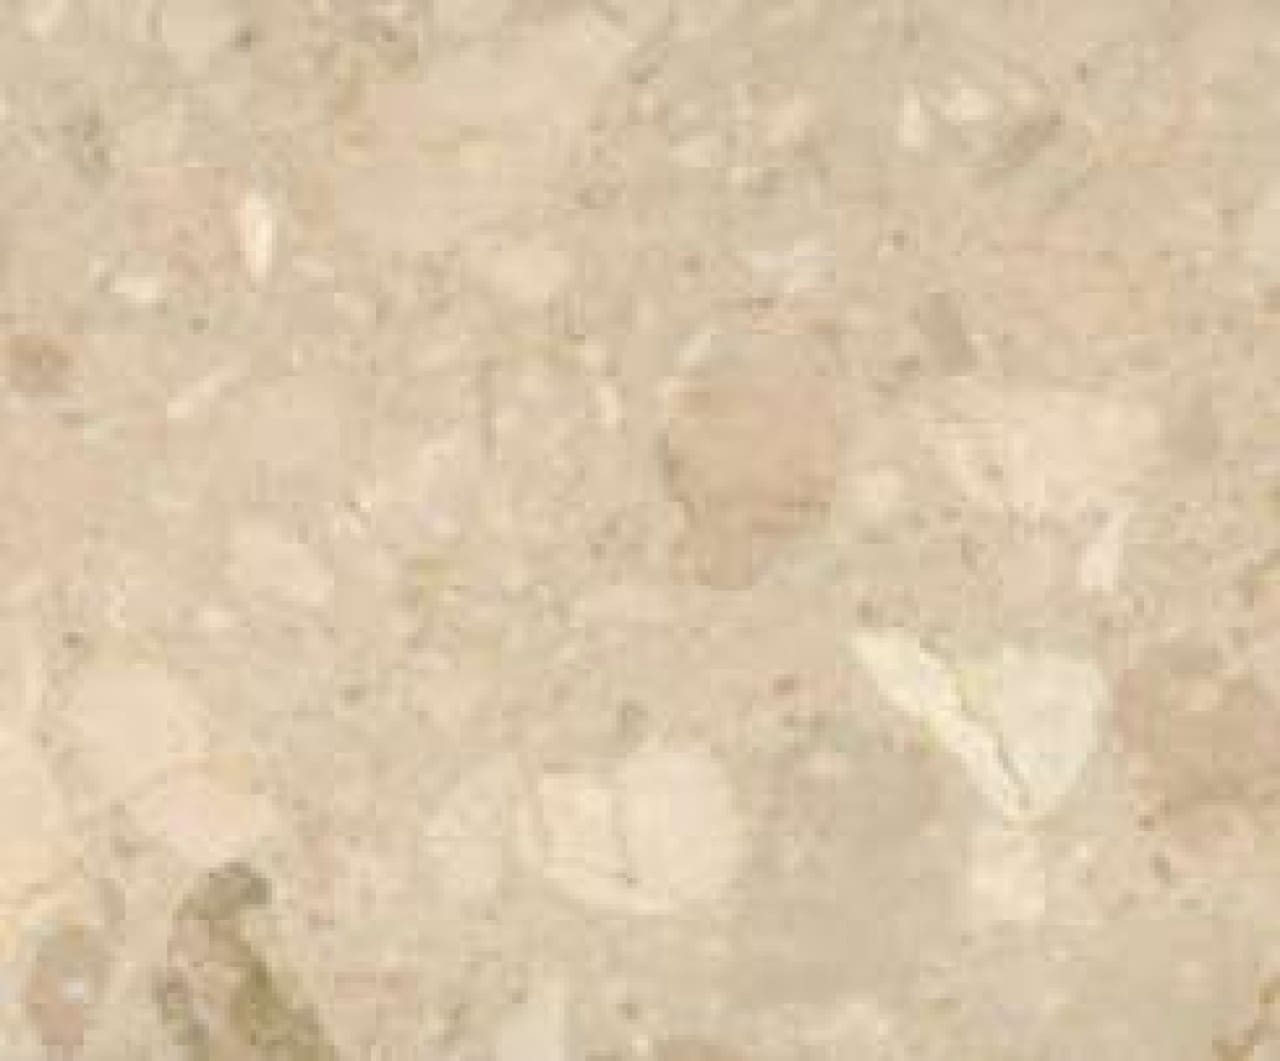 The applications of marble conglomerate Botticino